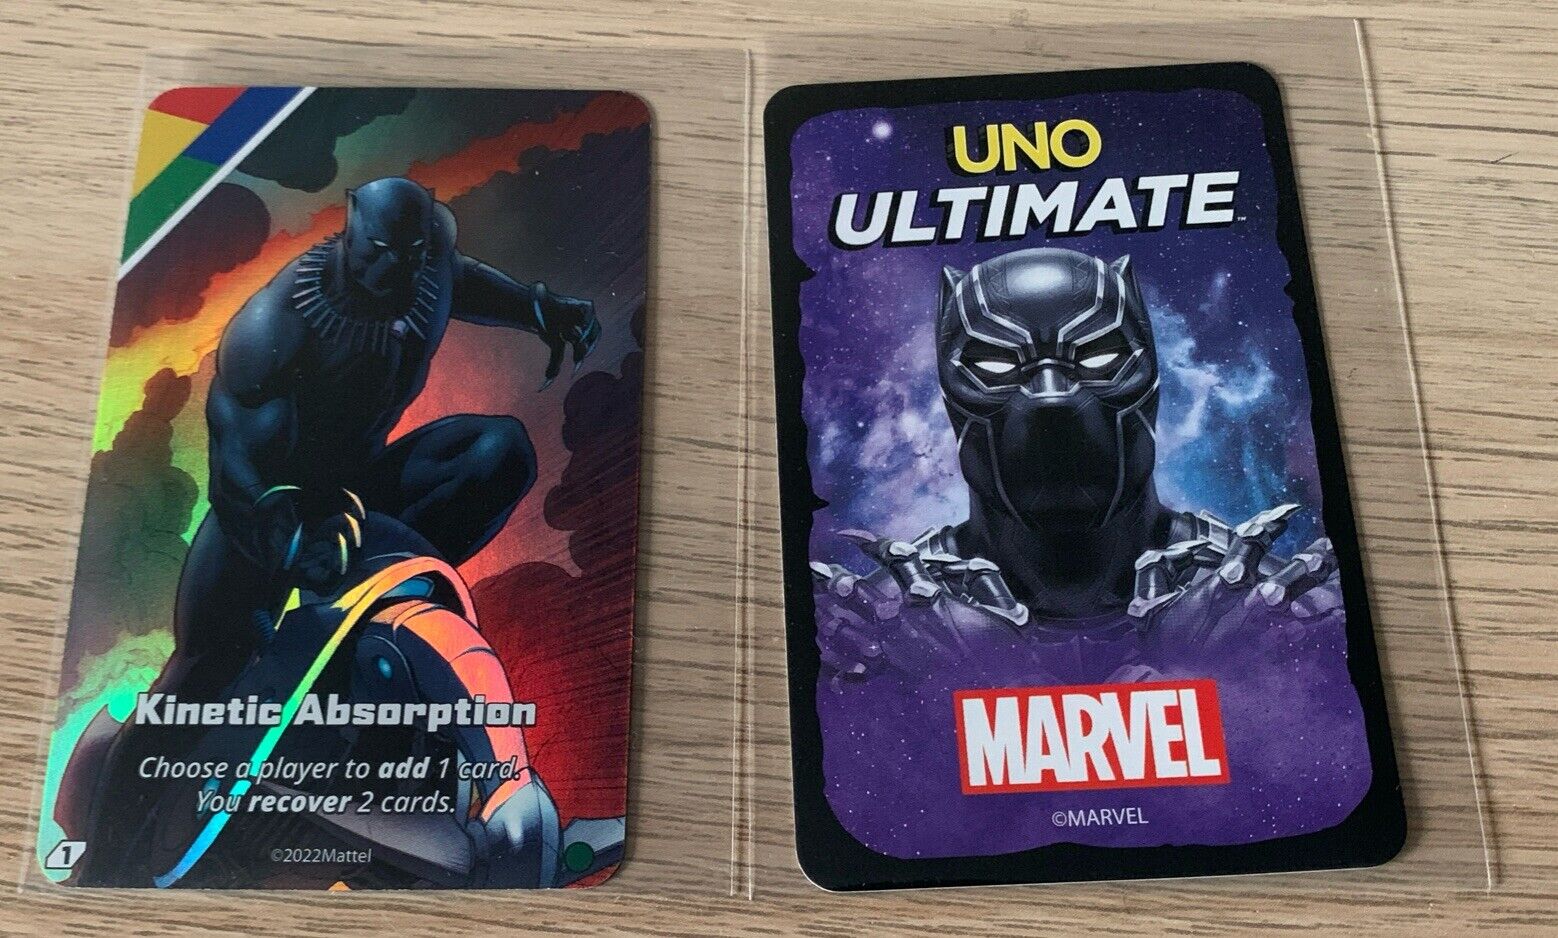 2022 Marvel UNO Ultimate Card Game - Common Black Panther Kinetic Absorption